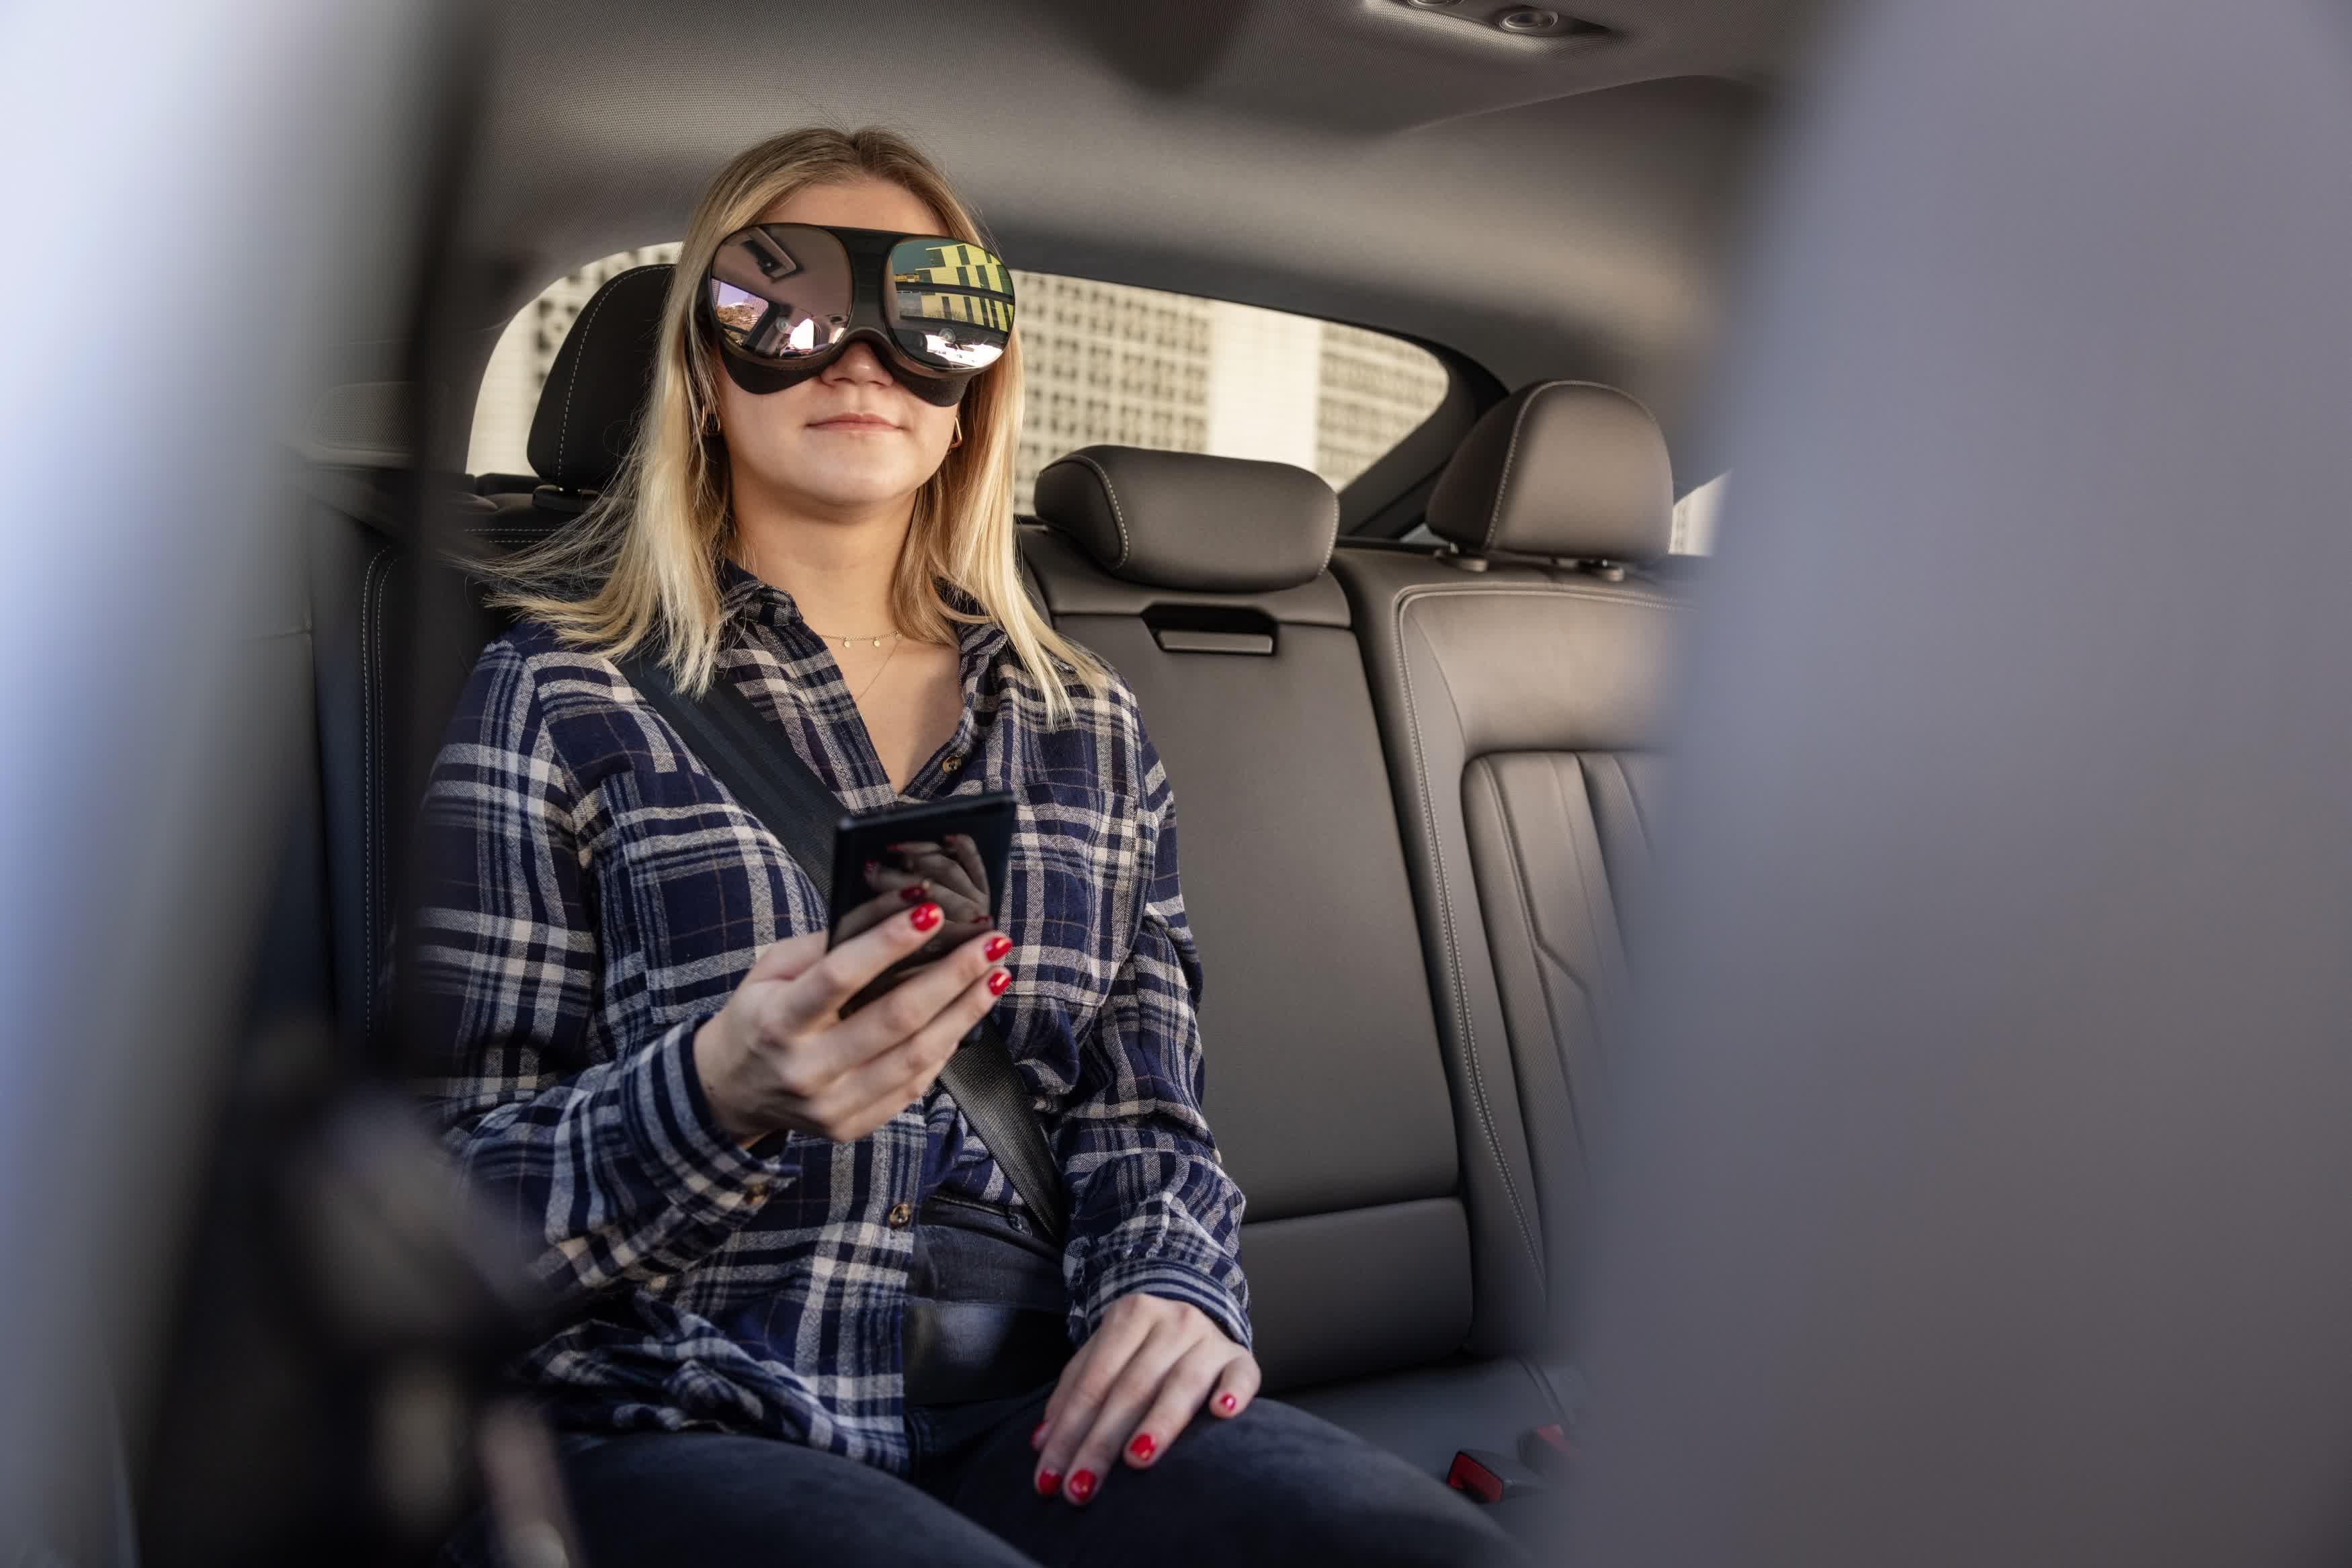 Audi is introducing a Holoride VR experience as an option for its cars starting June 2022